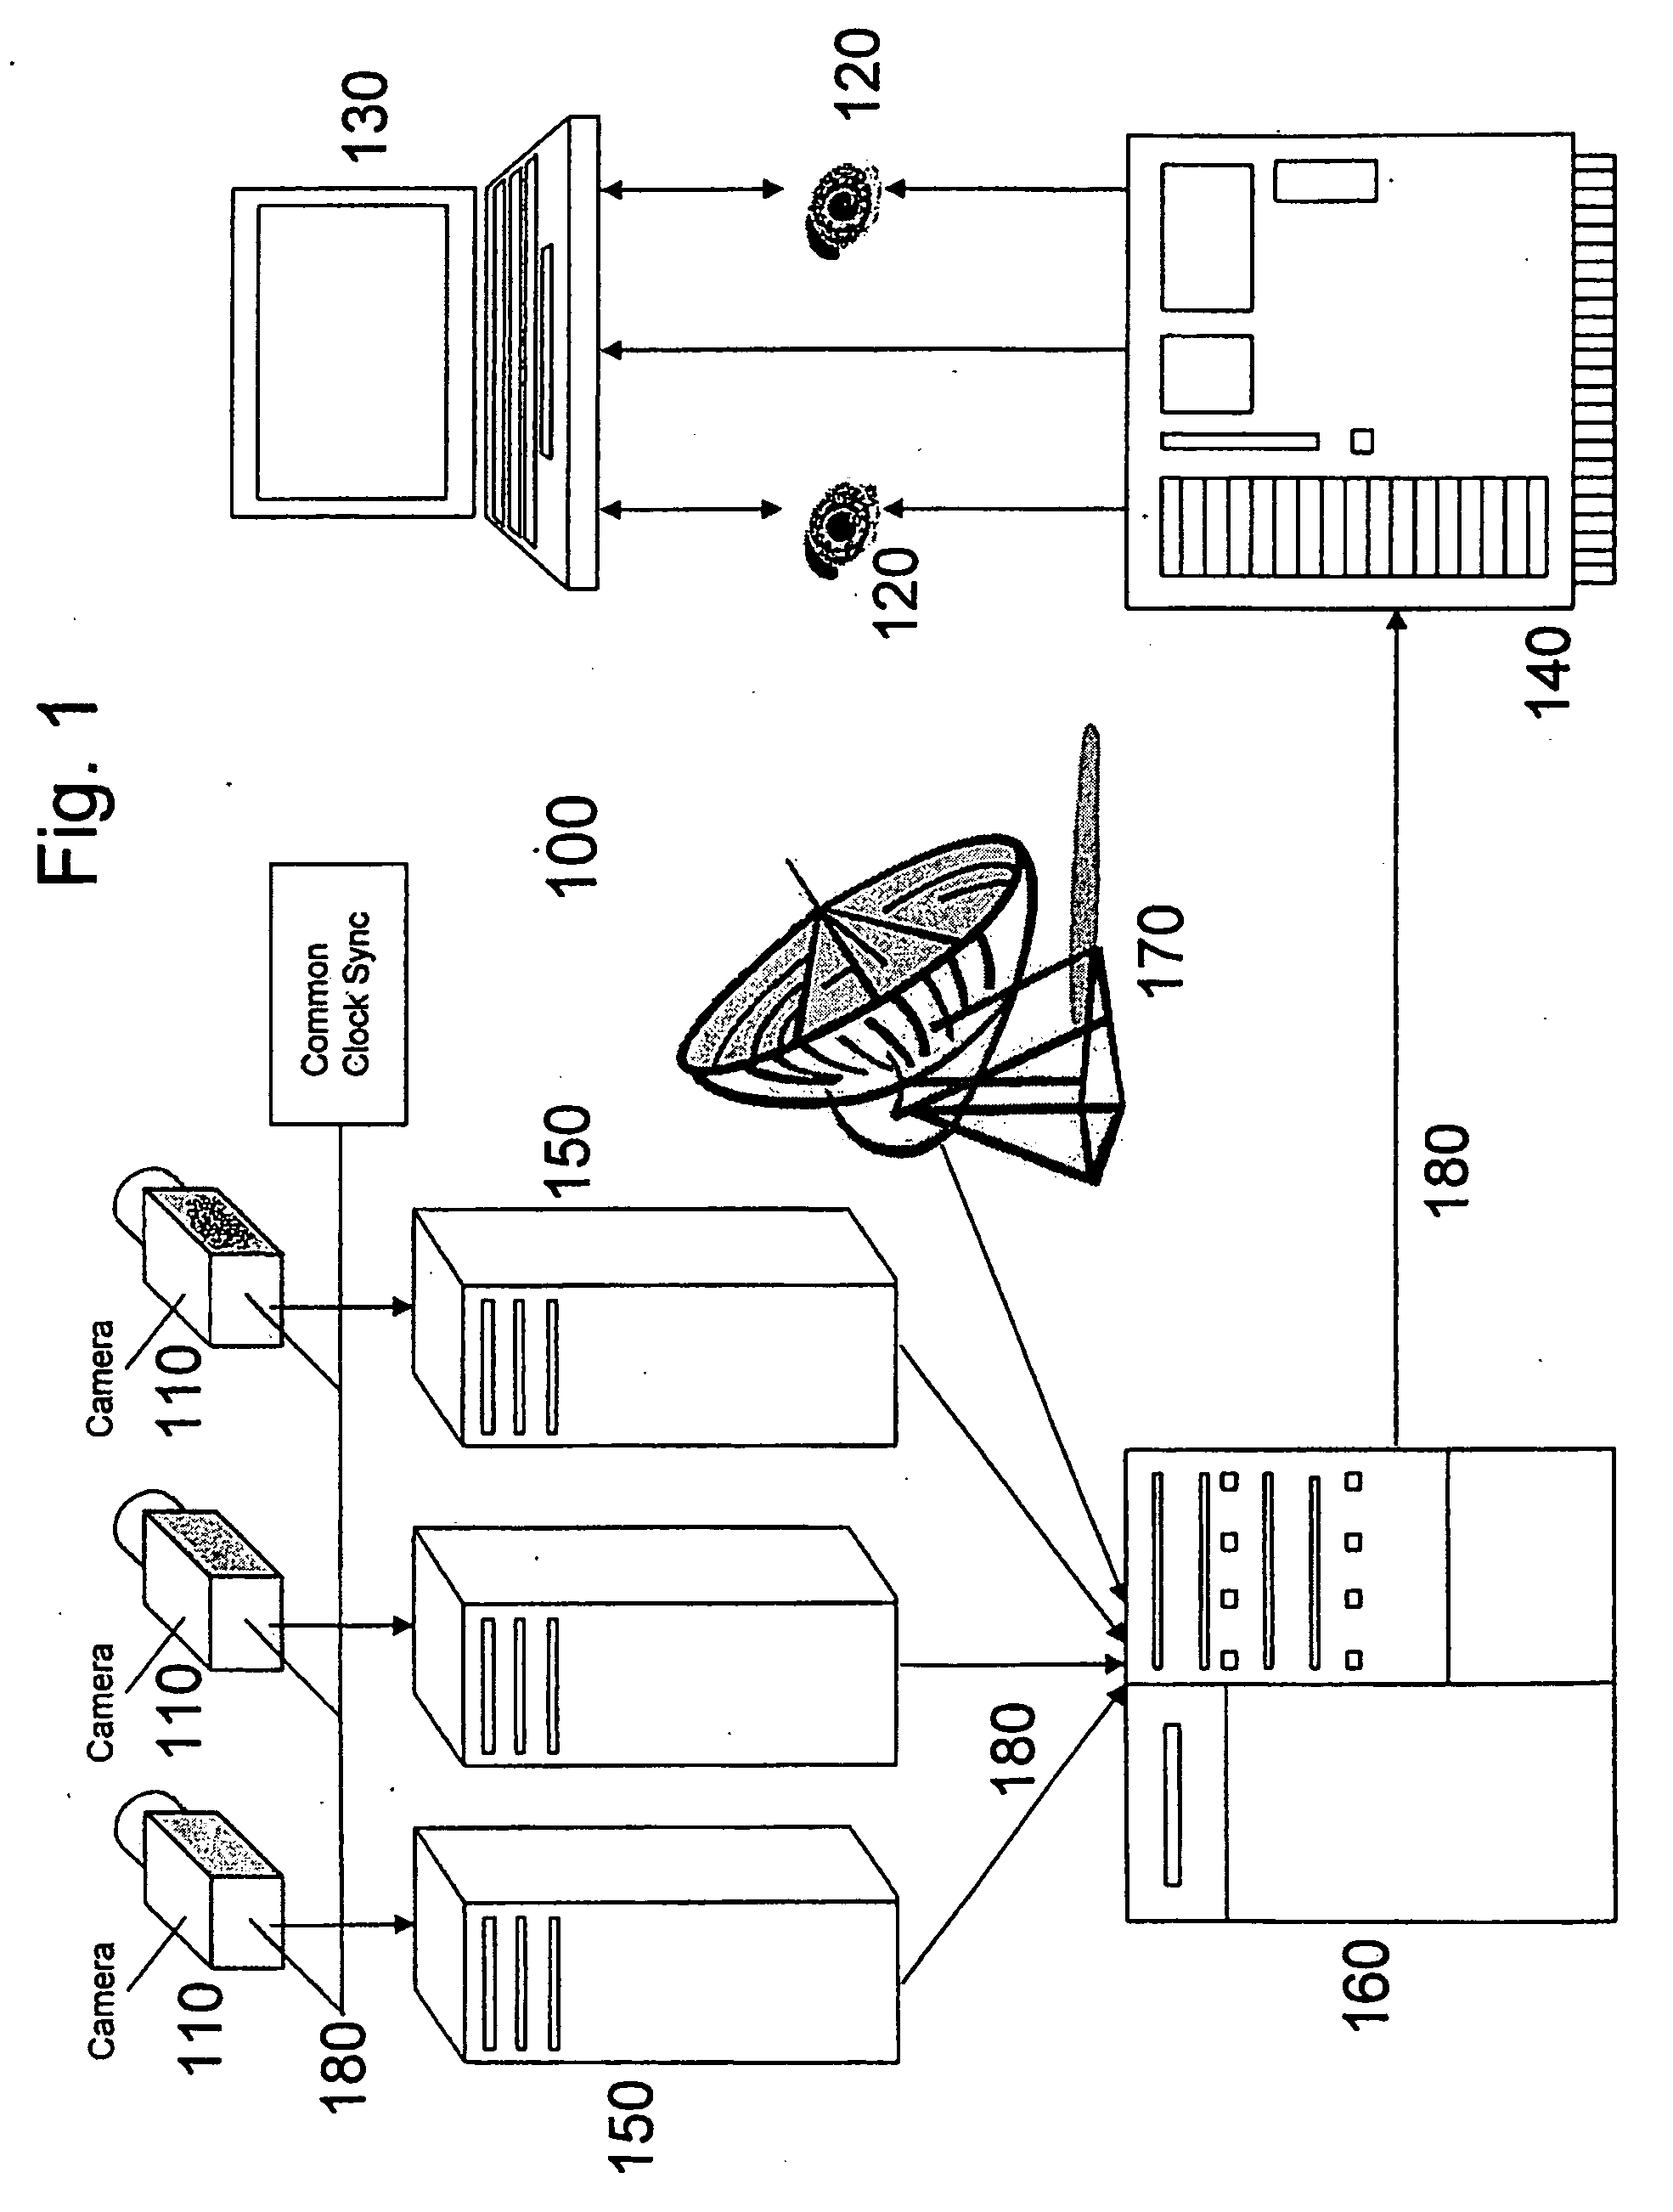 System and method for real-time 3-d object tracking and alerting via networked sensors